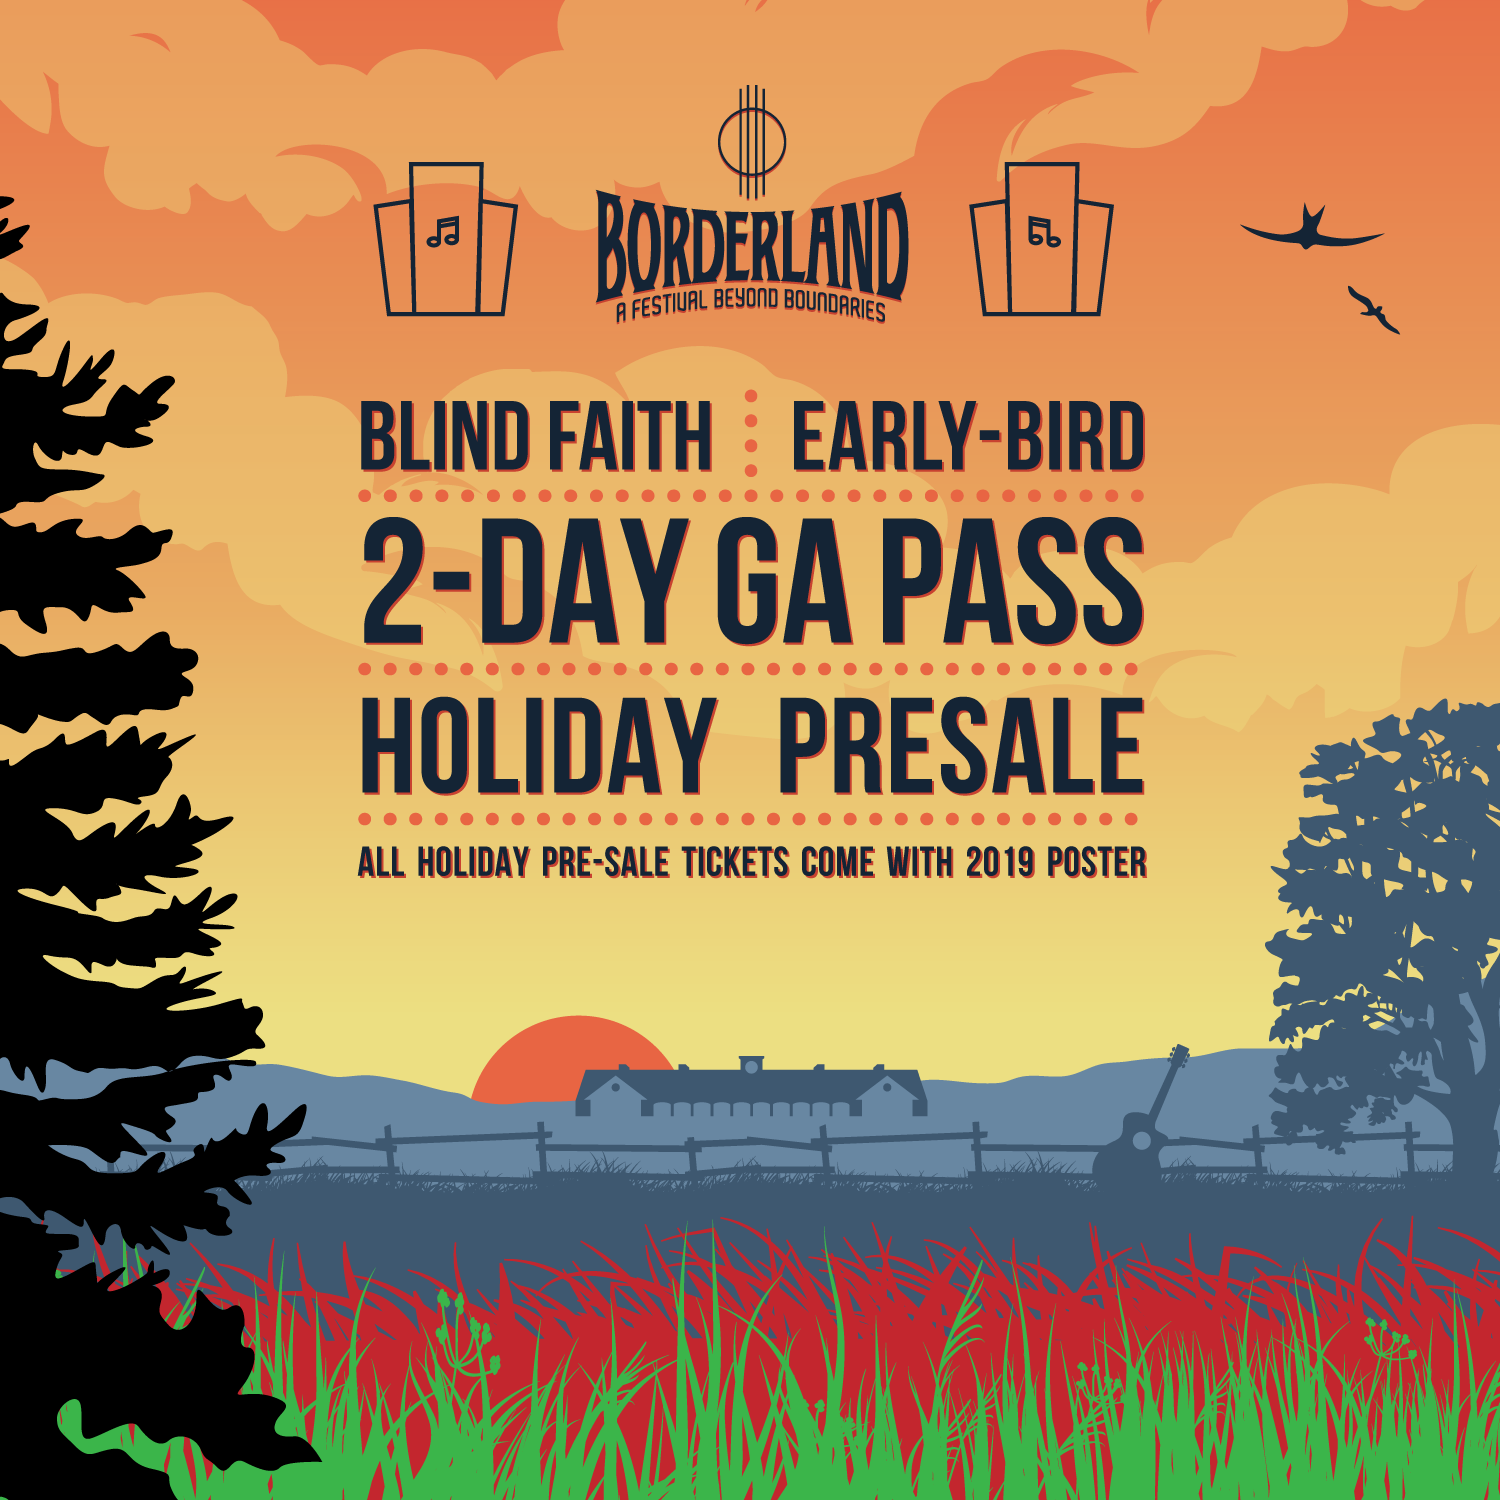 BORDERLAND FESTIVAL HOLIDAY PRE-SALE TICKETS ON SALE!